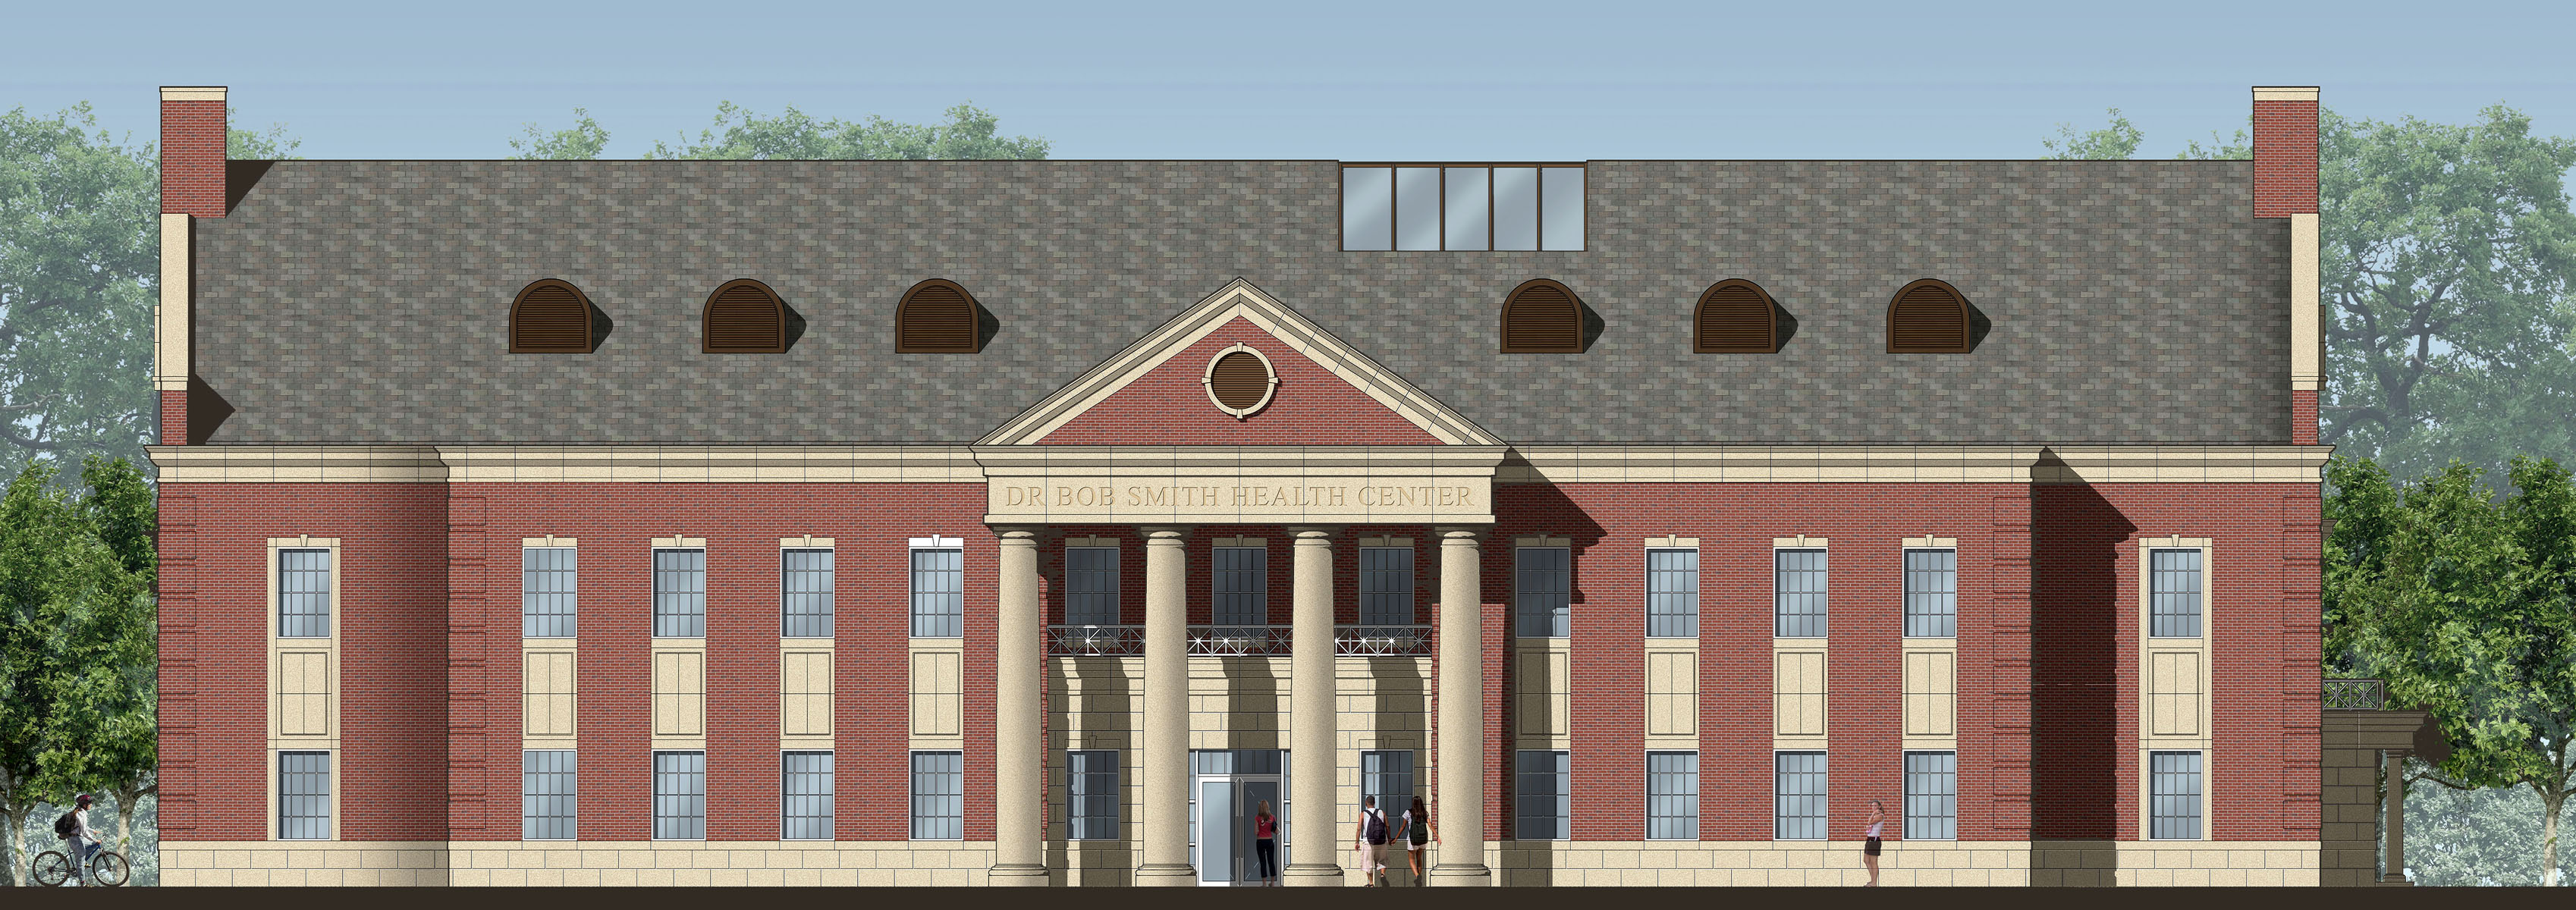 Rendering of the Dr. Bob Smith Health Center at SMU